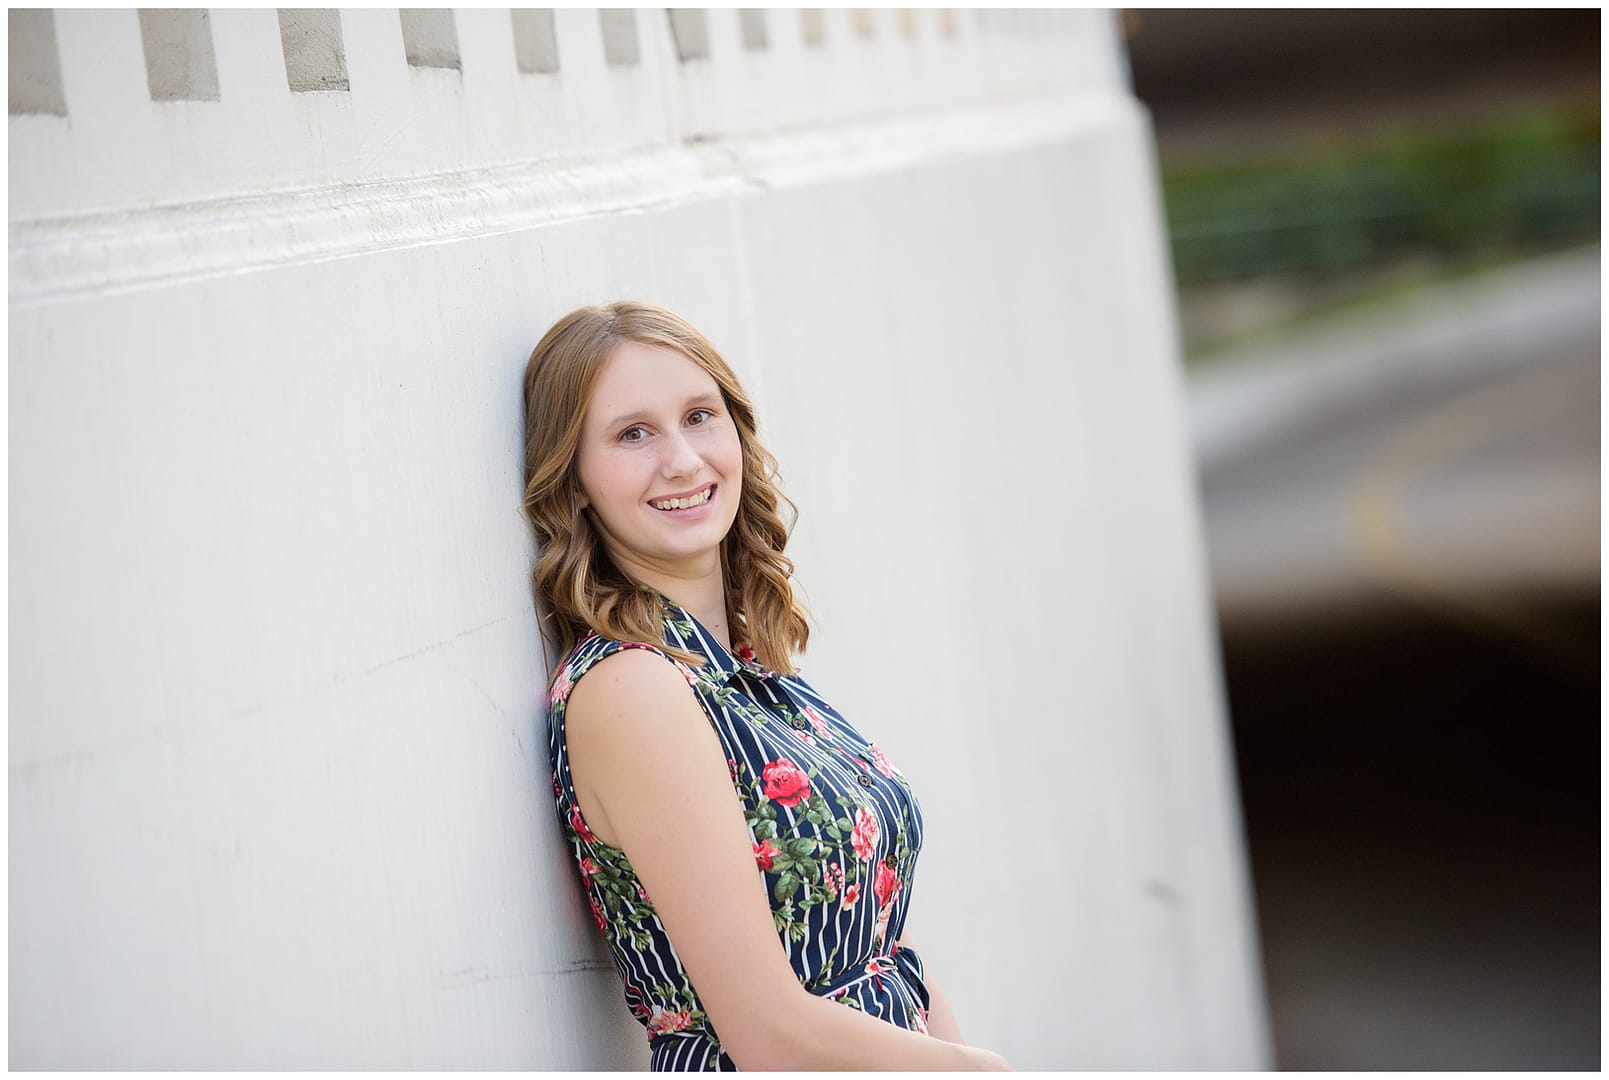 Girl poses against wall for senior portrait. Photos by Tiffany Hix Photography.